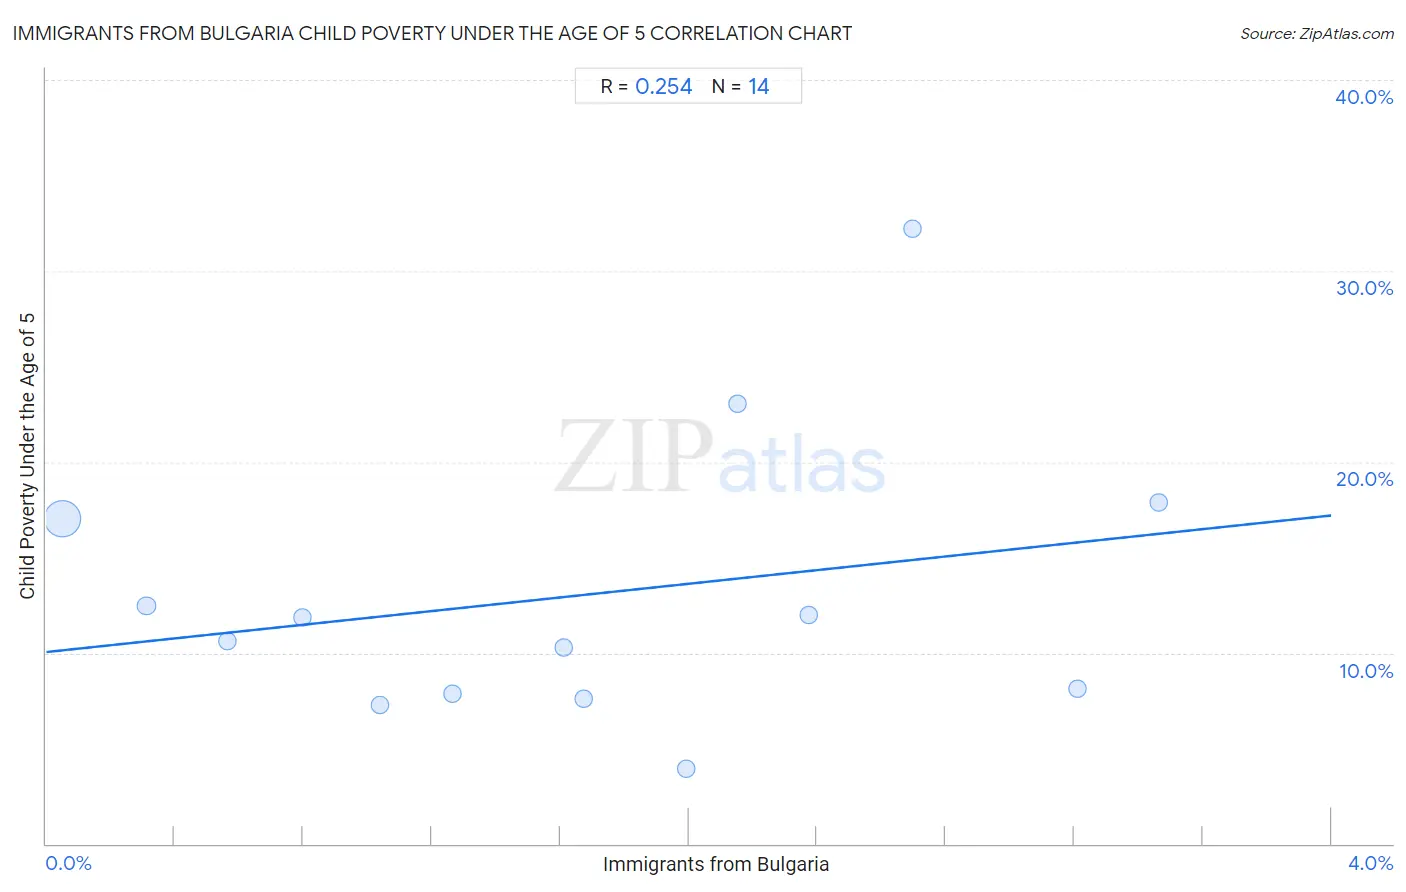 Immigrants from Bulgaria Child Poverty Under the Age of 5